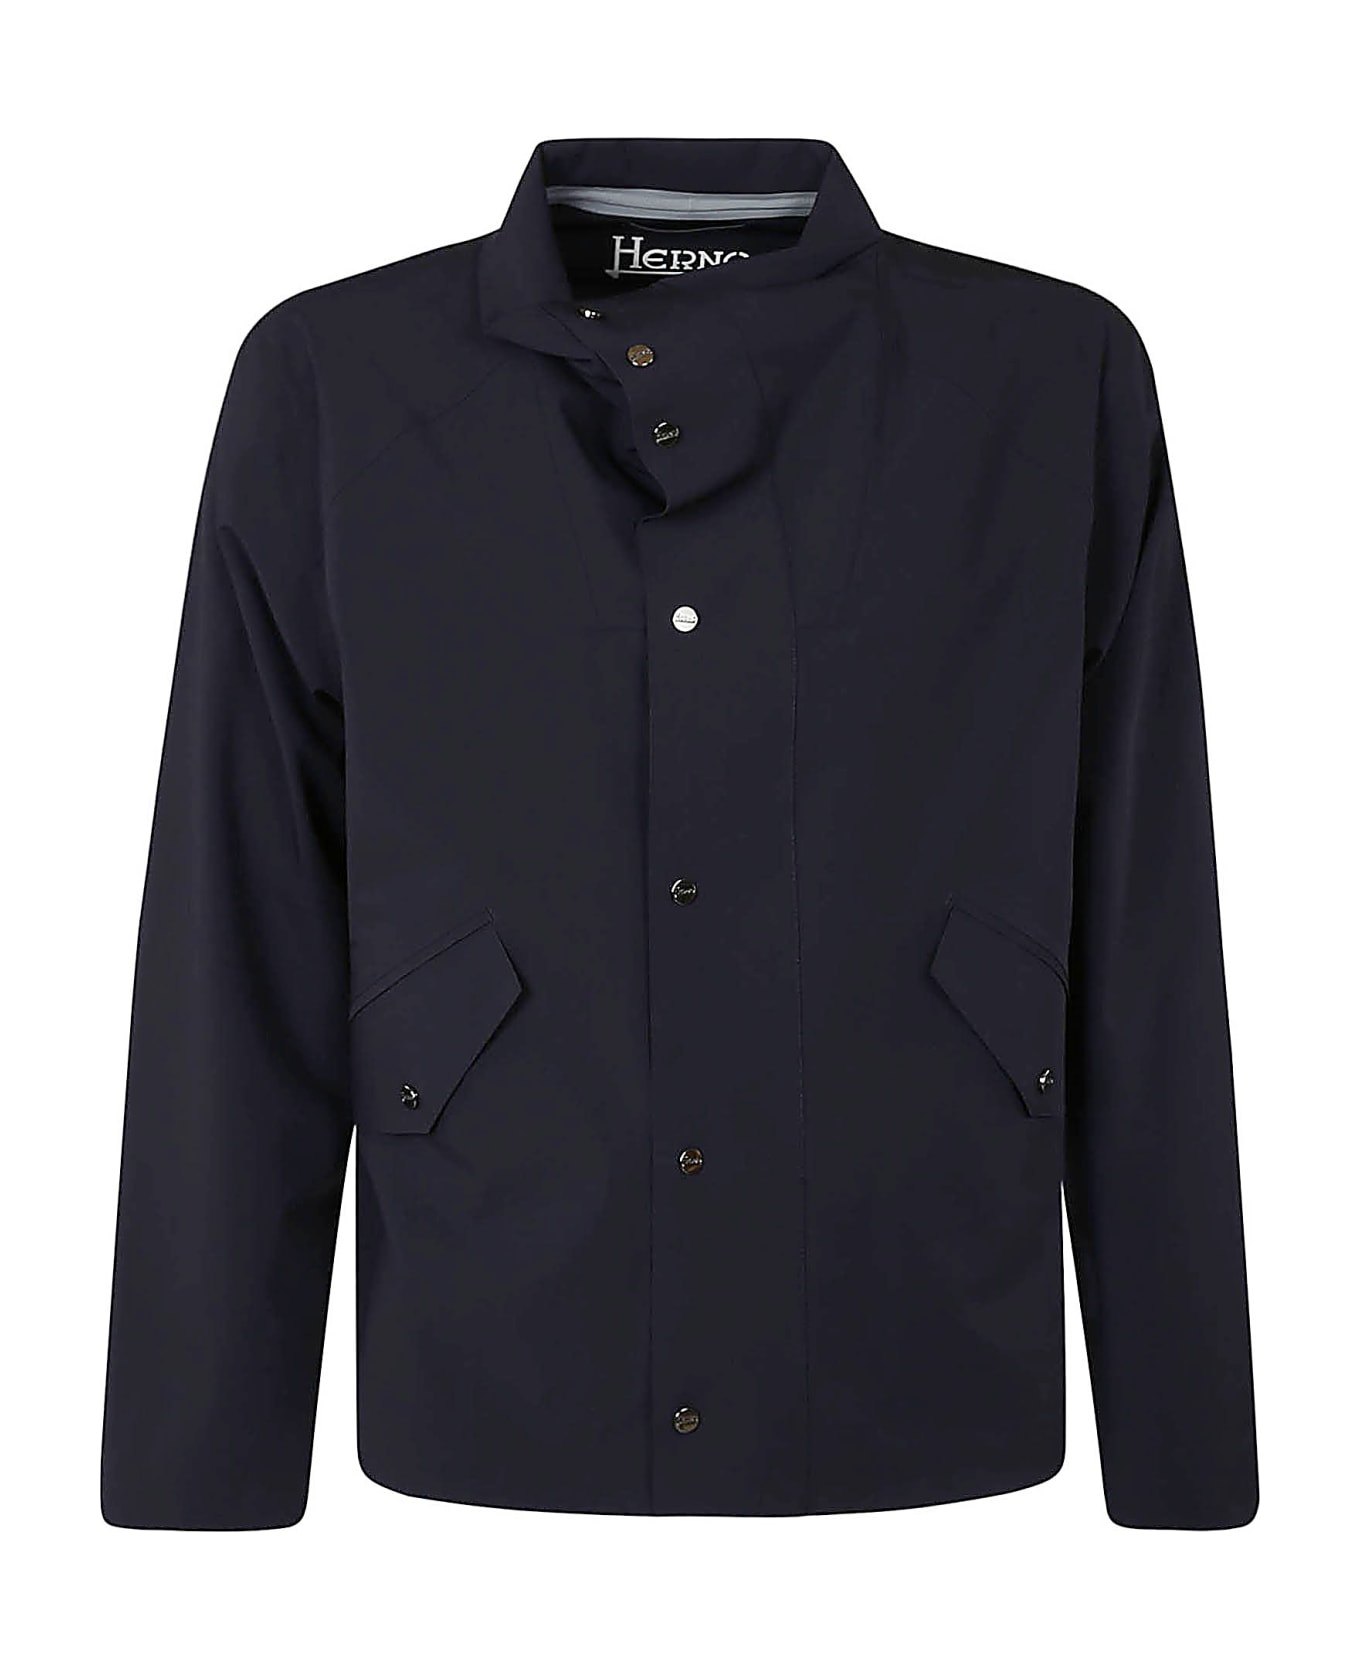 Herno Classic Side Pockets Buttoned Jacket - Blue Navy ジャケット